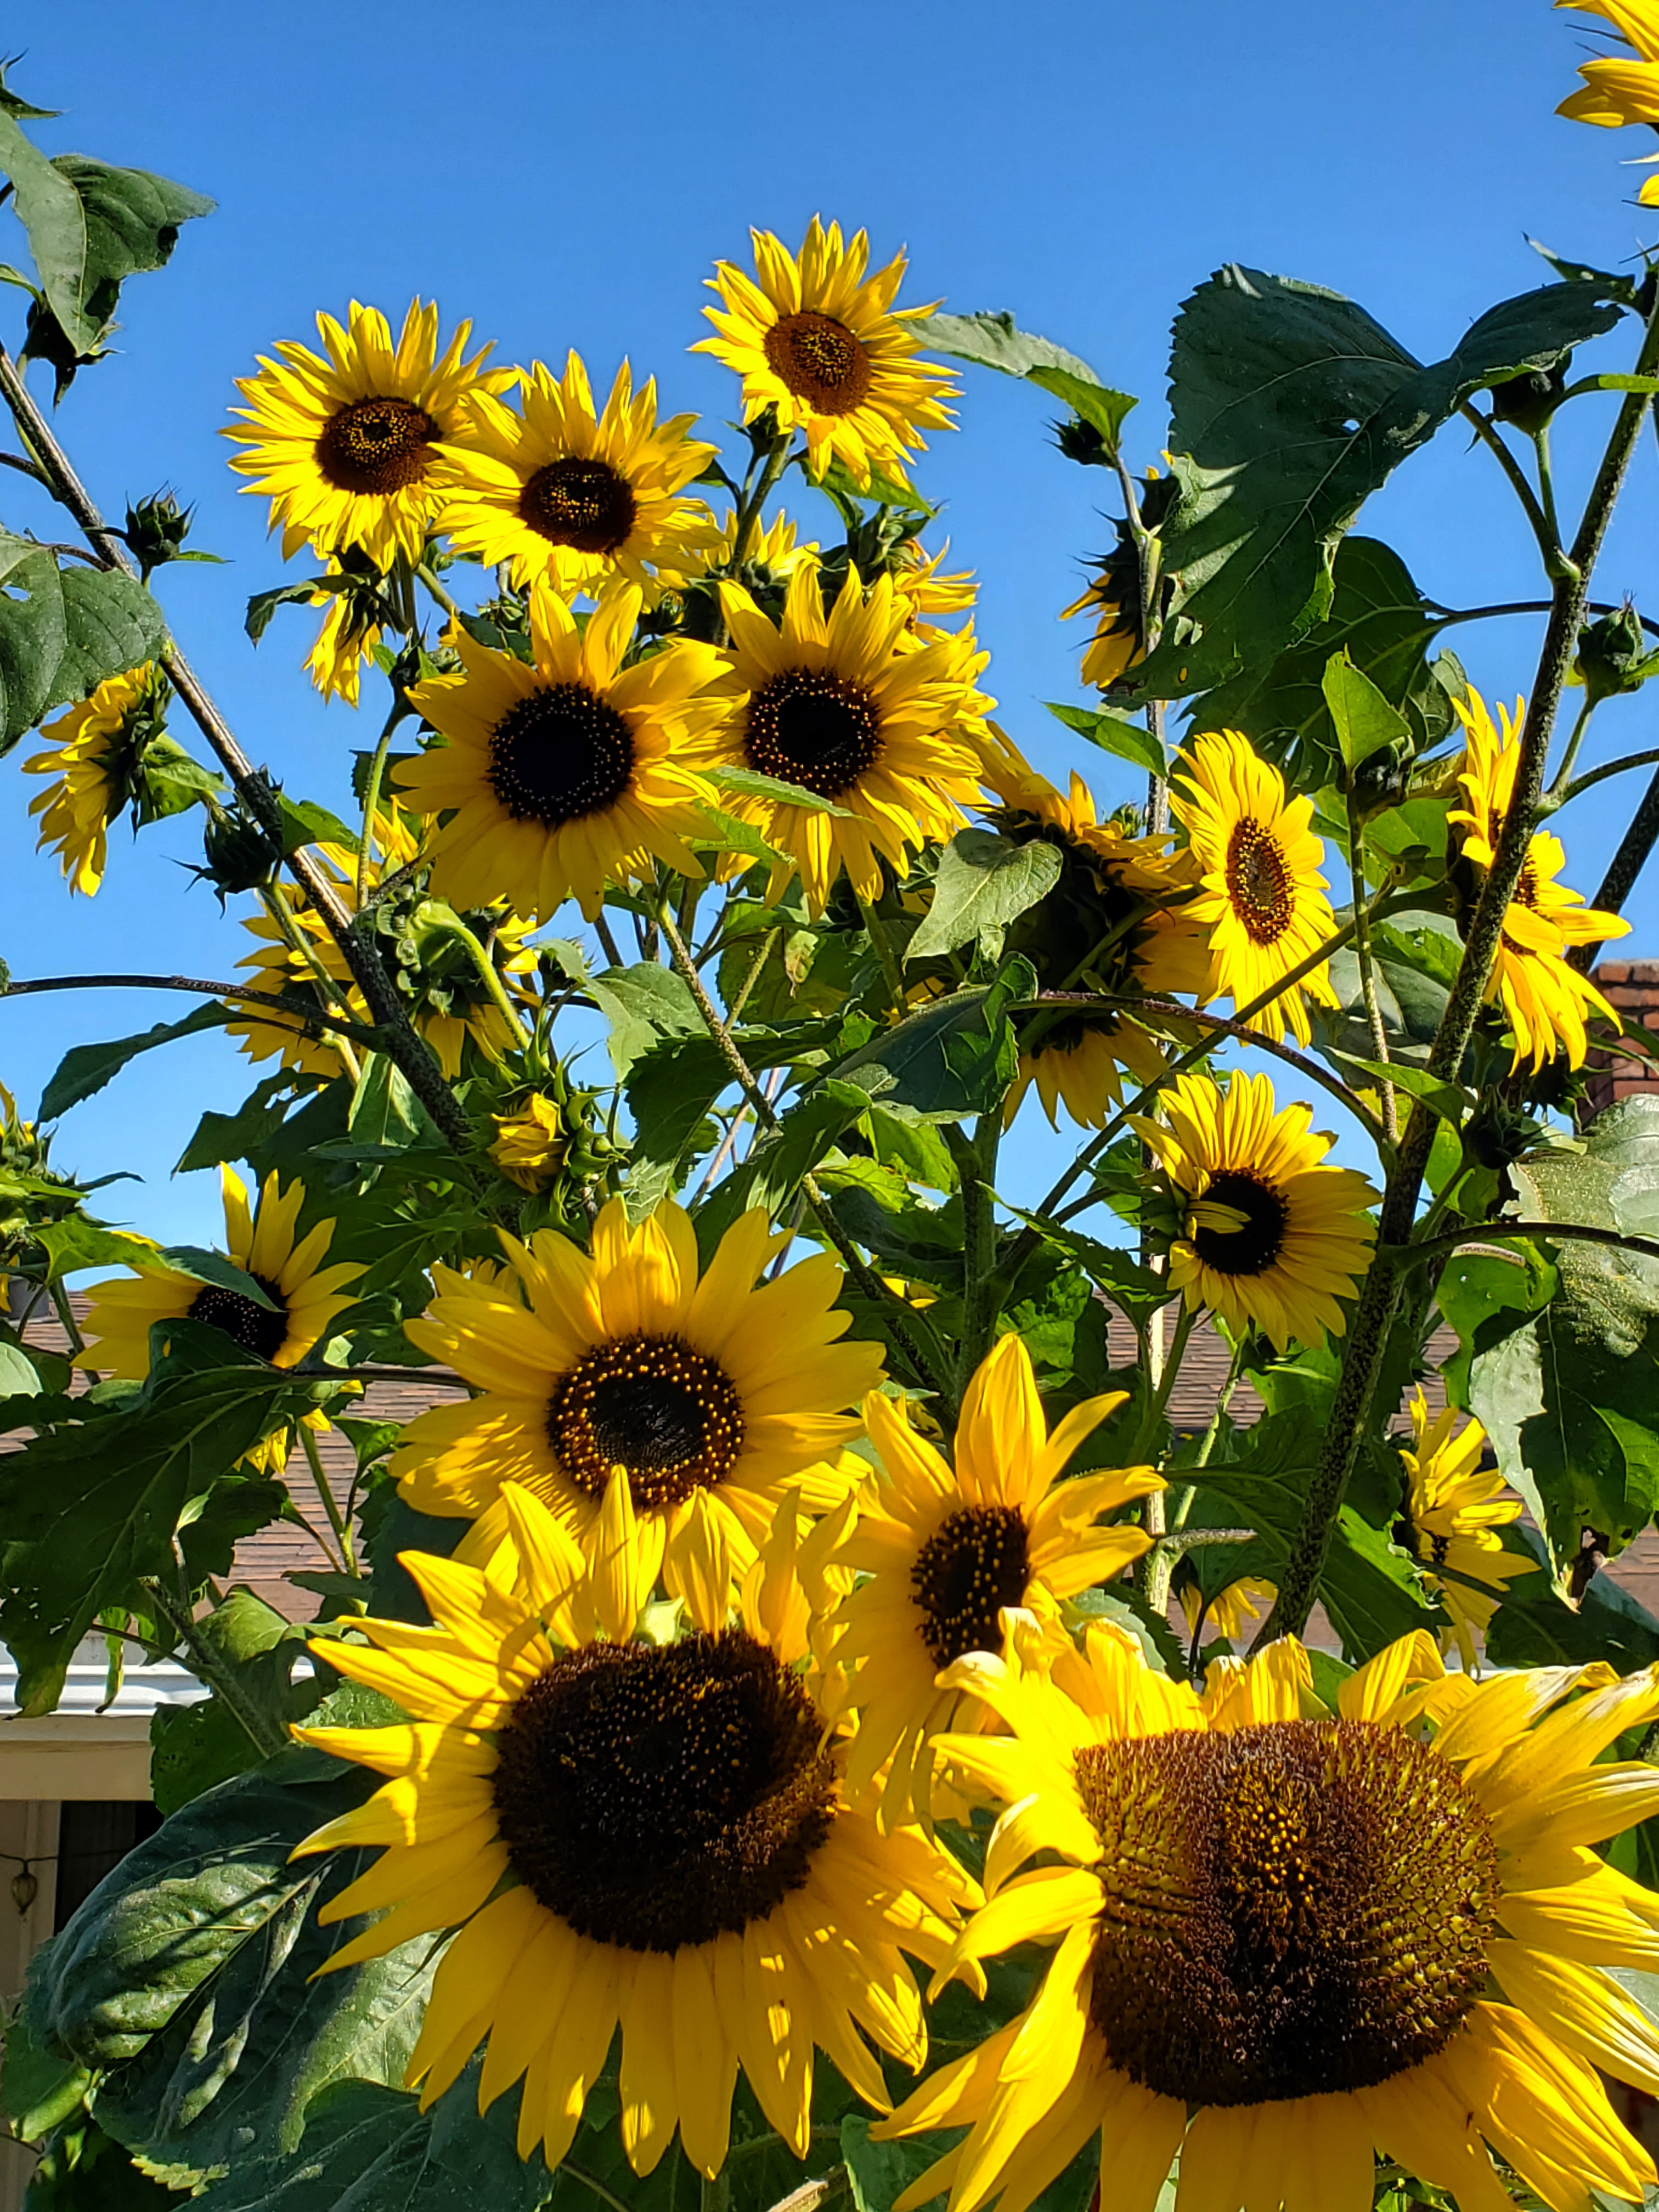 Burst of sunflowers obscuring a house